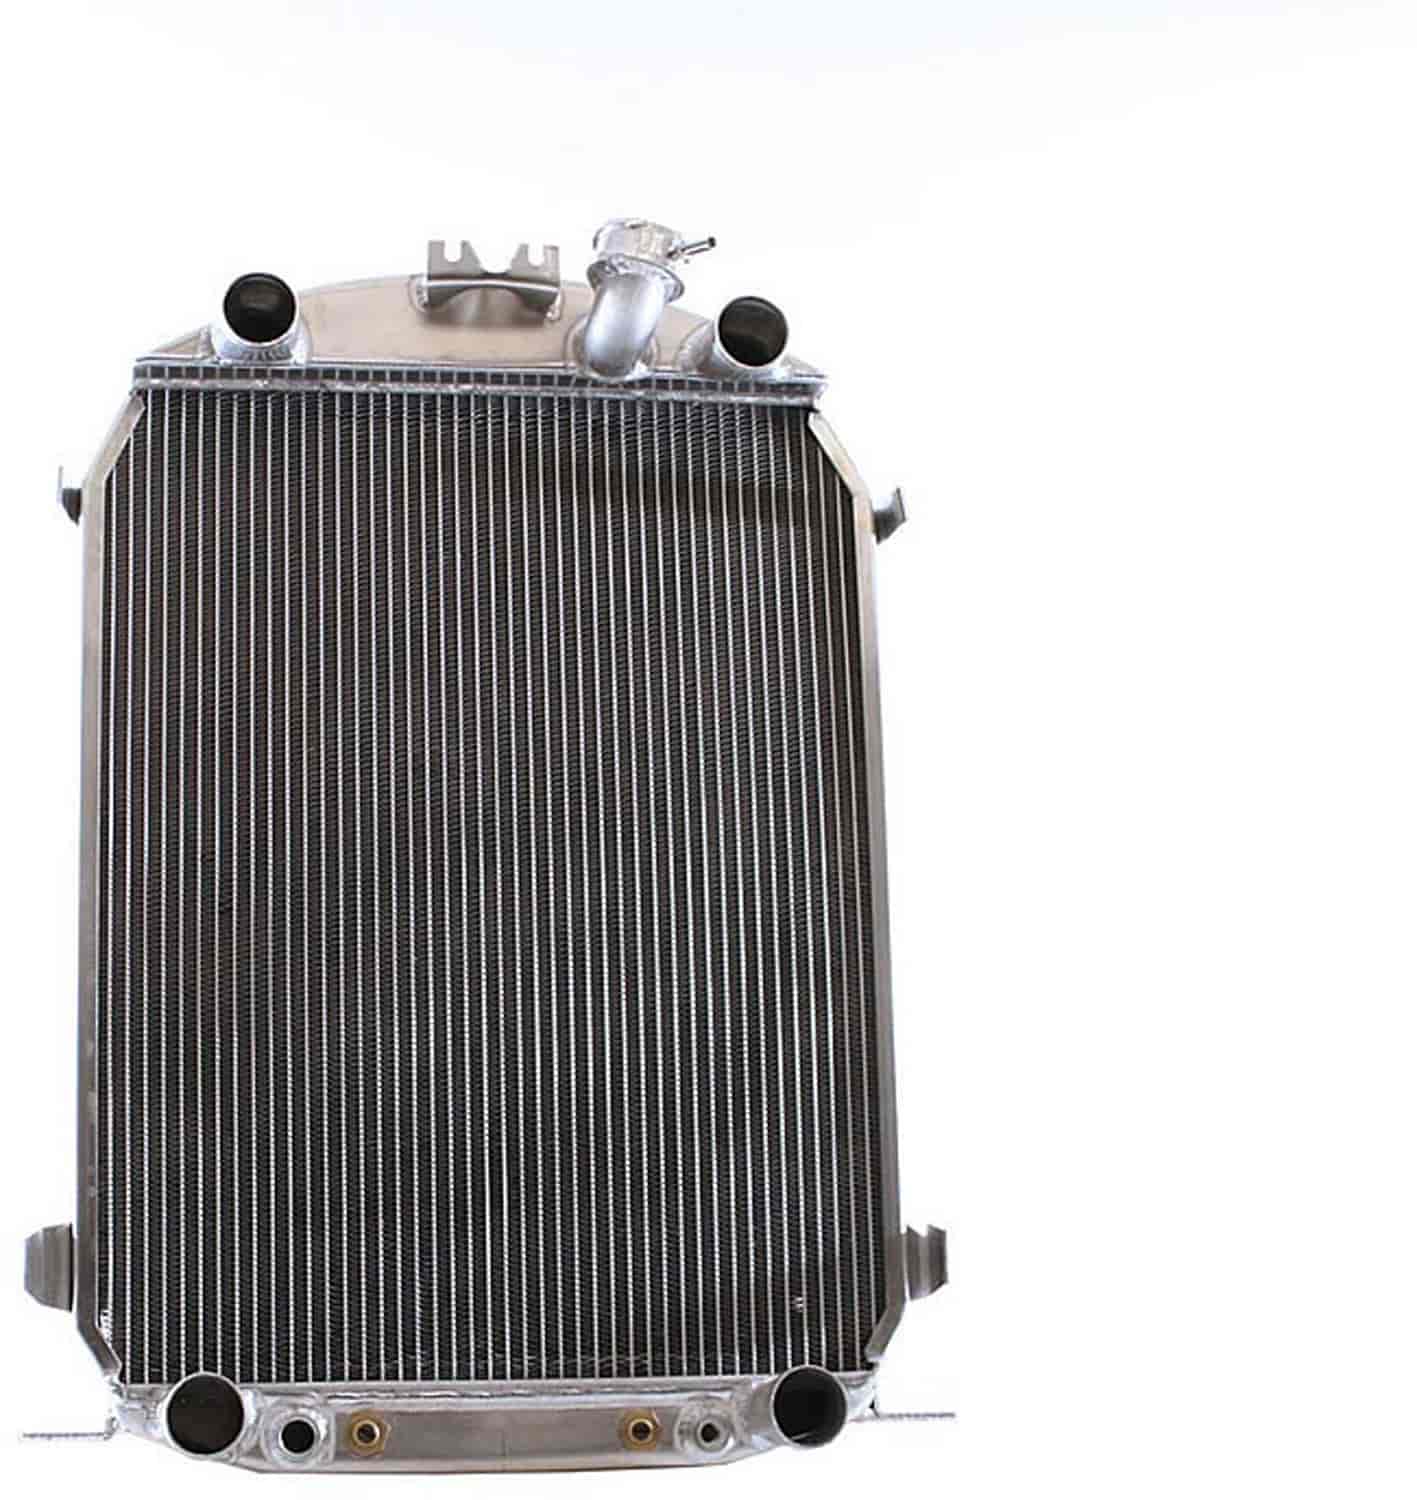 ExactFit Radiator for 1930-1931 Model A with Early